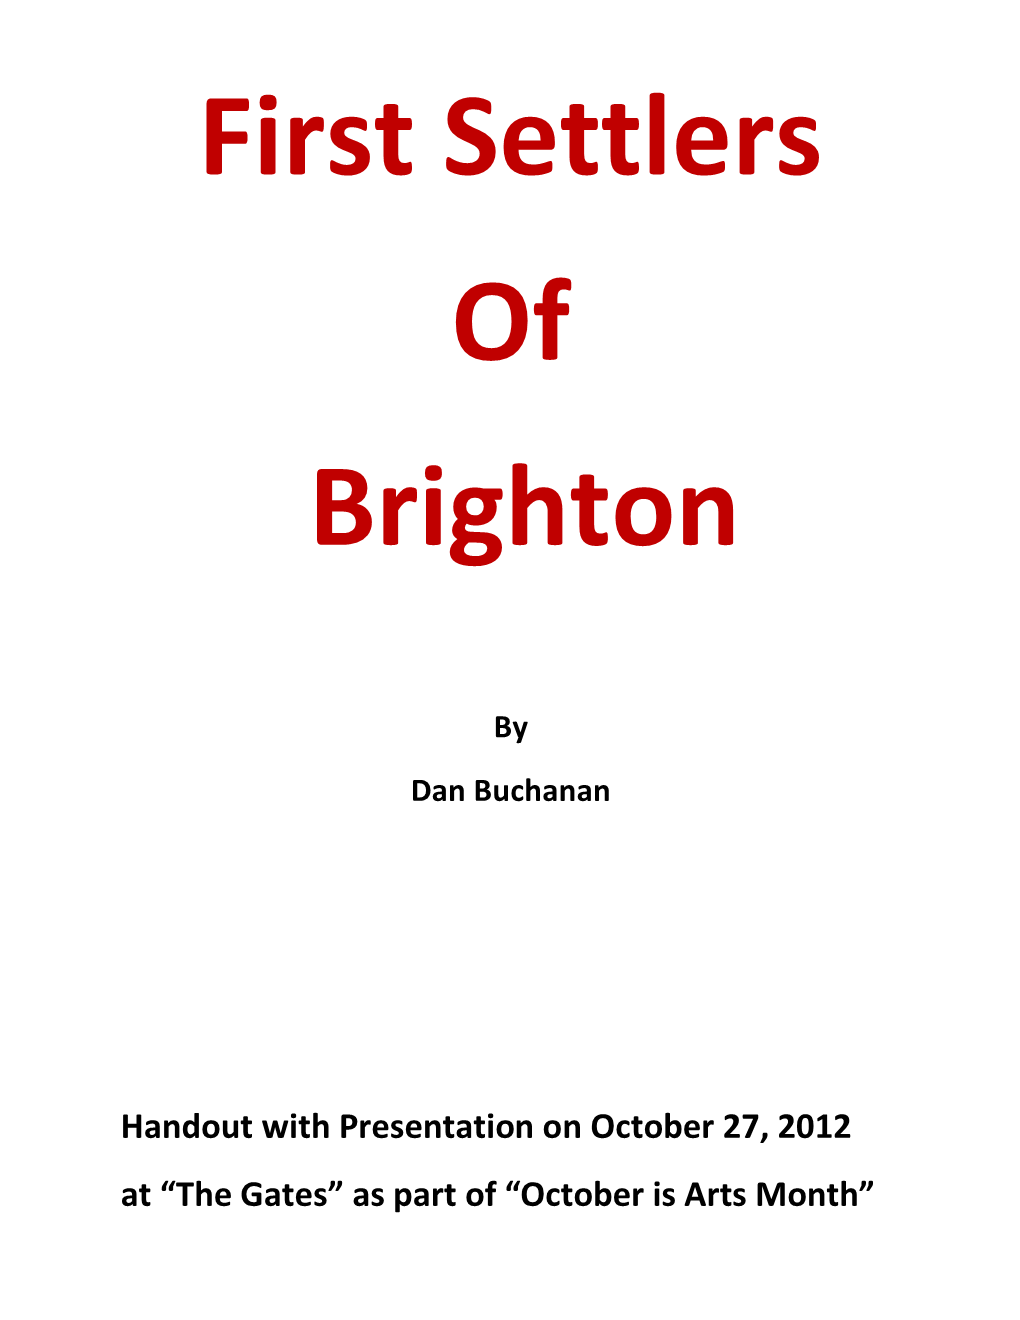 First Settlers of Brighton